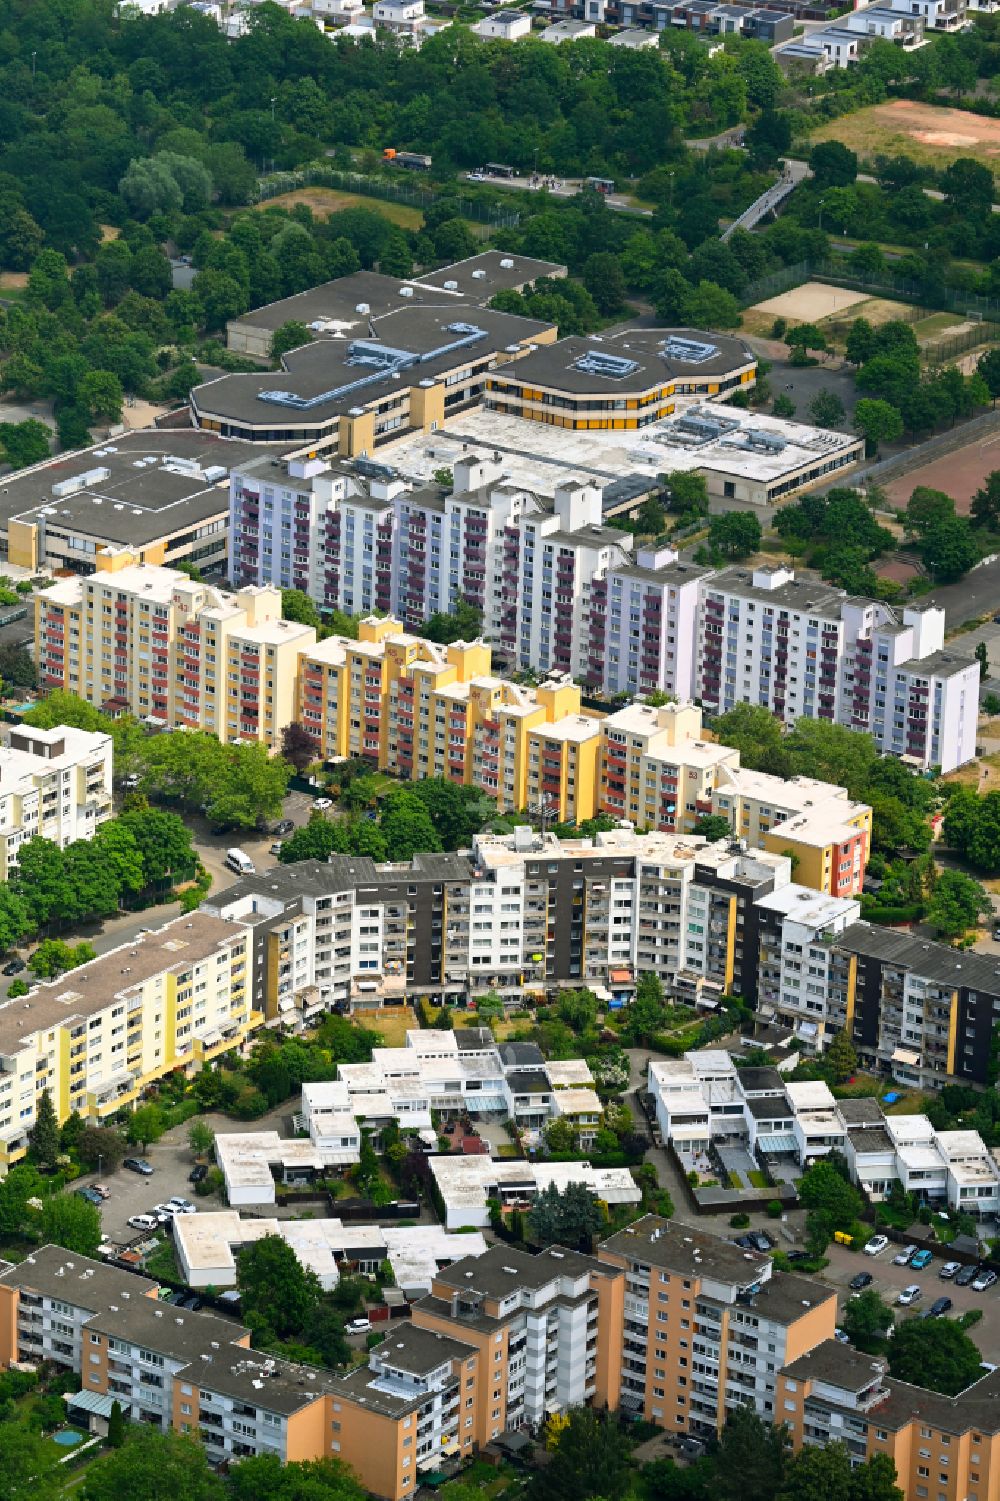 Aerial photograph Wolfsburg - Residential area of industrially manufactured settlement on street Jenaer Strasse in the district Westhagen in Wolfsburg in the state Lower Saxony, Germany